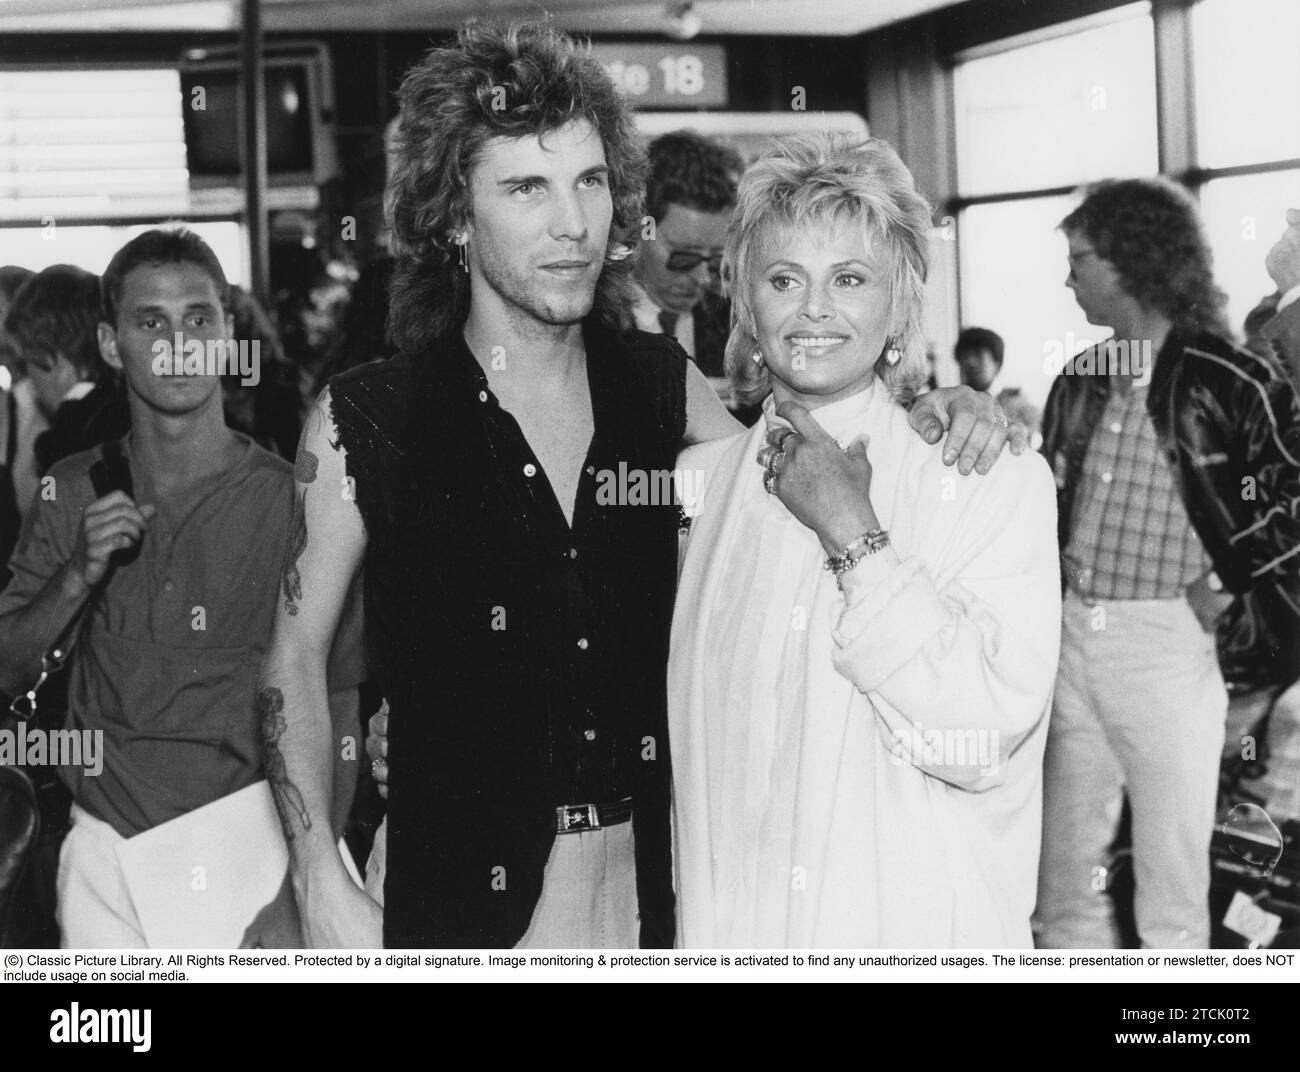 Britt Ekland. Swedish actress, famous for her role as the Bond girl Mary Goodnight in the feature film The man with the golden gun with Roger Moore as James Bond. Here with husband Slim Jim Phantom, with whom she was married between the years 1984 to 2003. 1986 Stock Photo